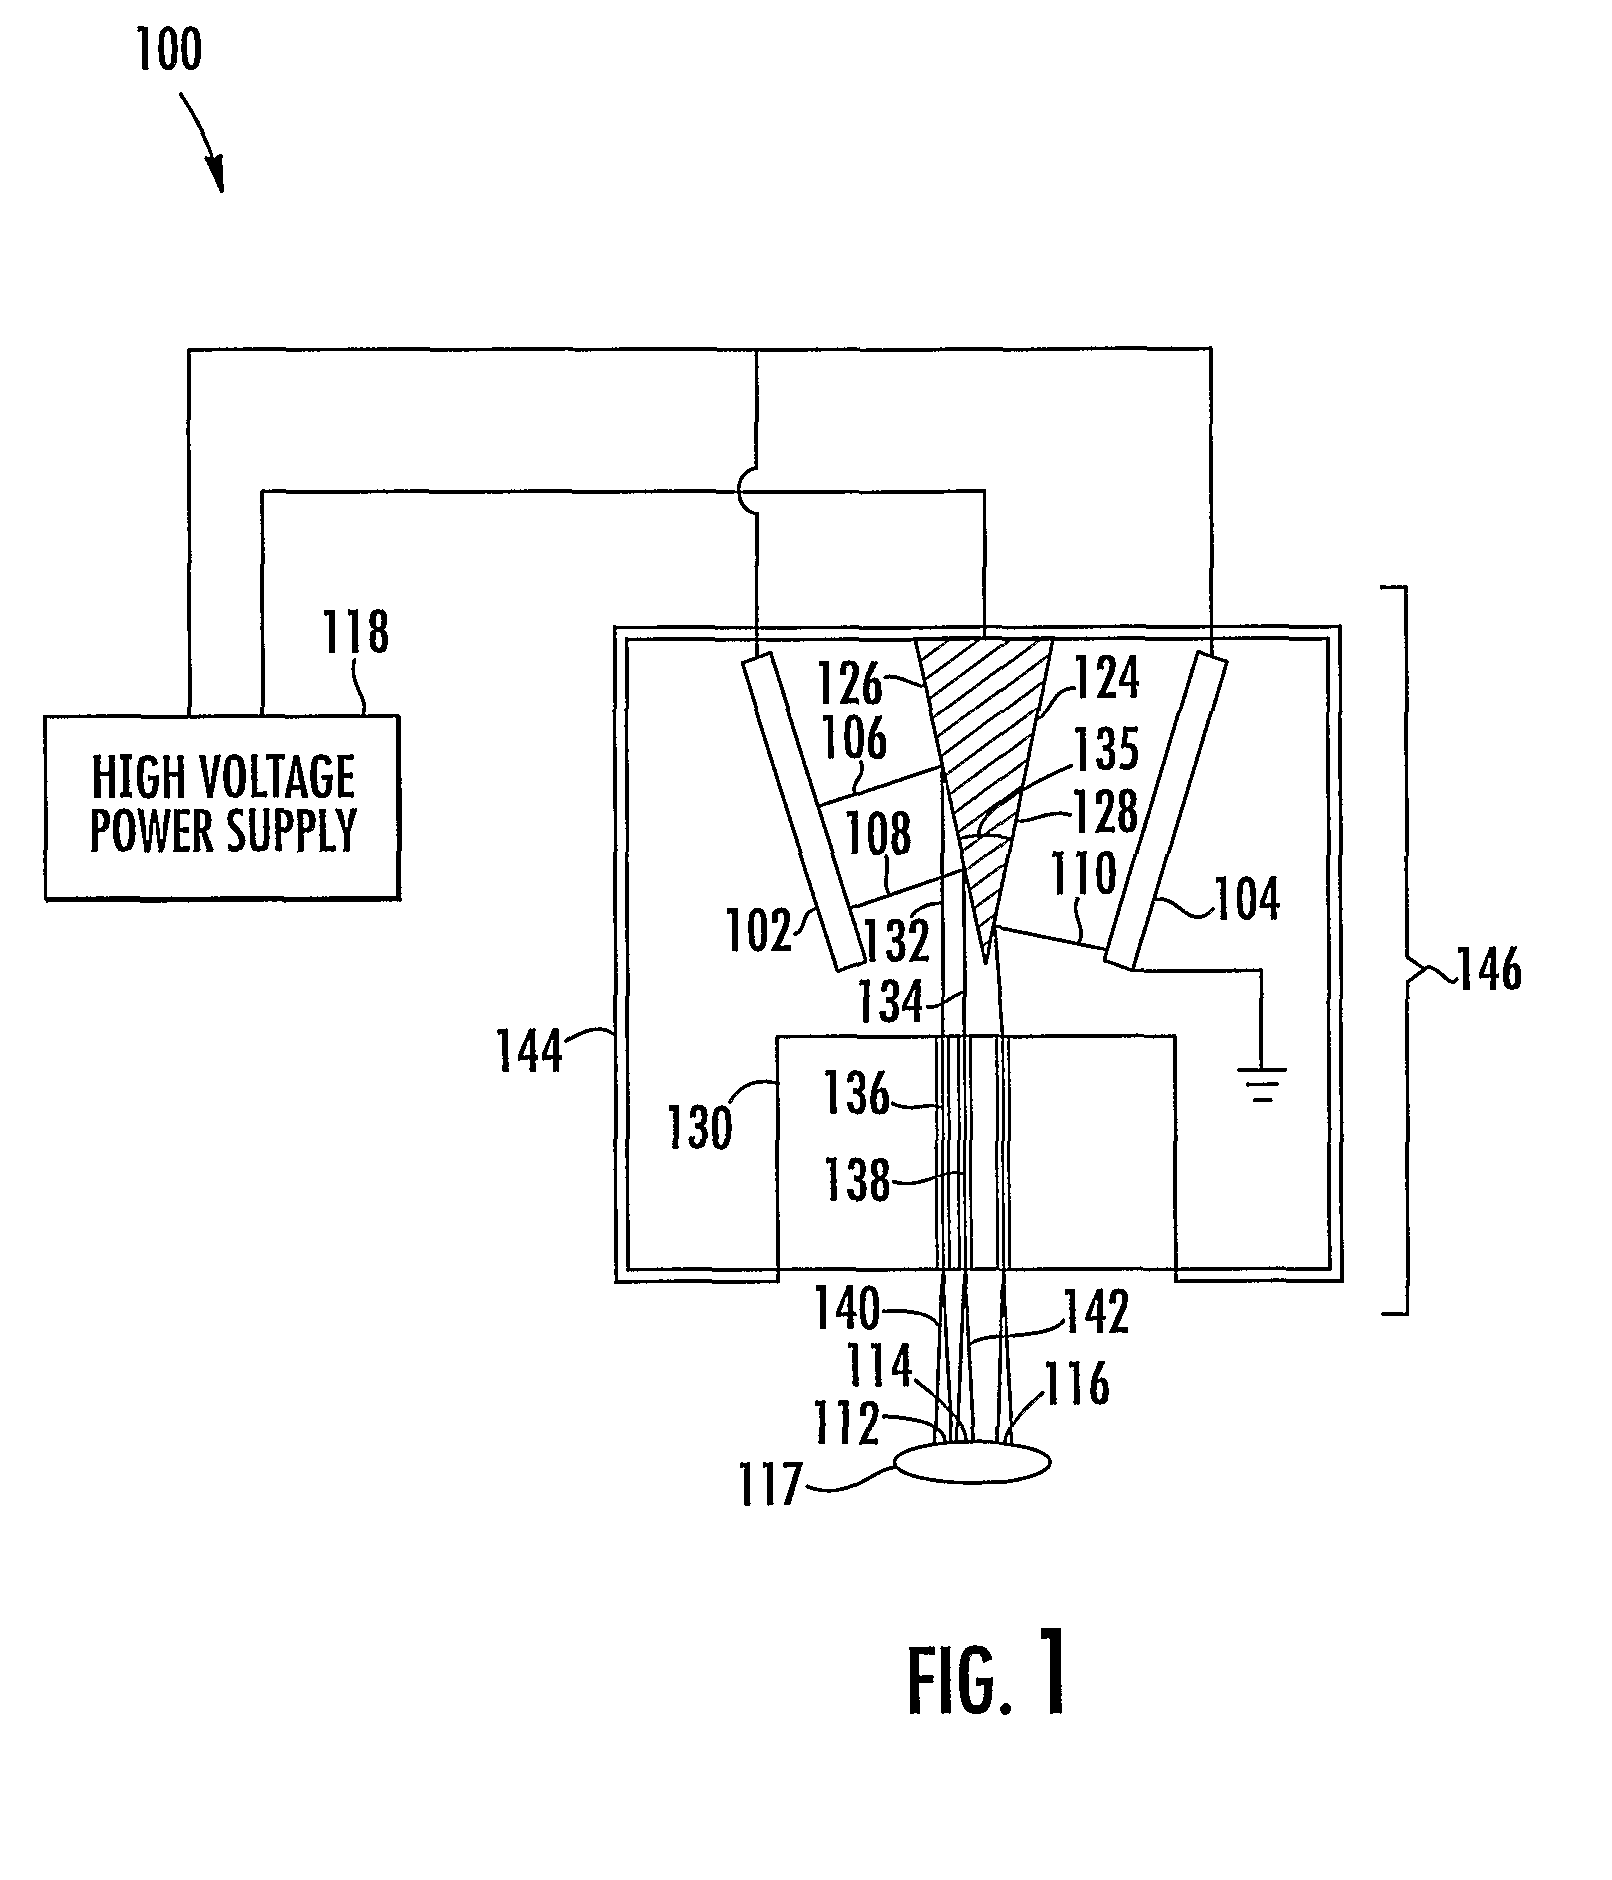 X-ray pixel beam array systems and methods for electronically shaping radiation fields and modulation radiation field intensity patterns for radiotherapy